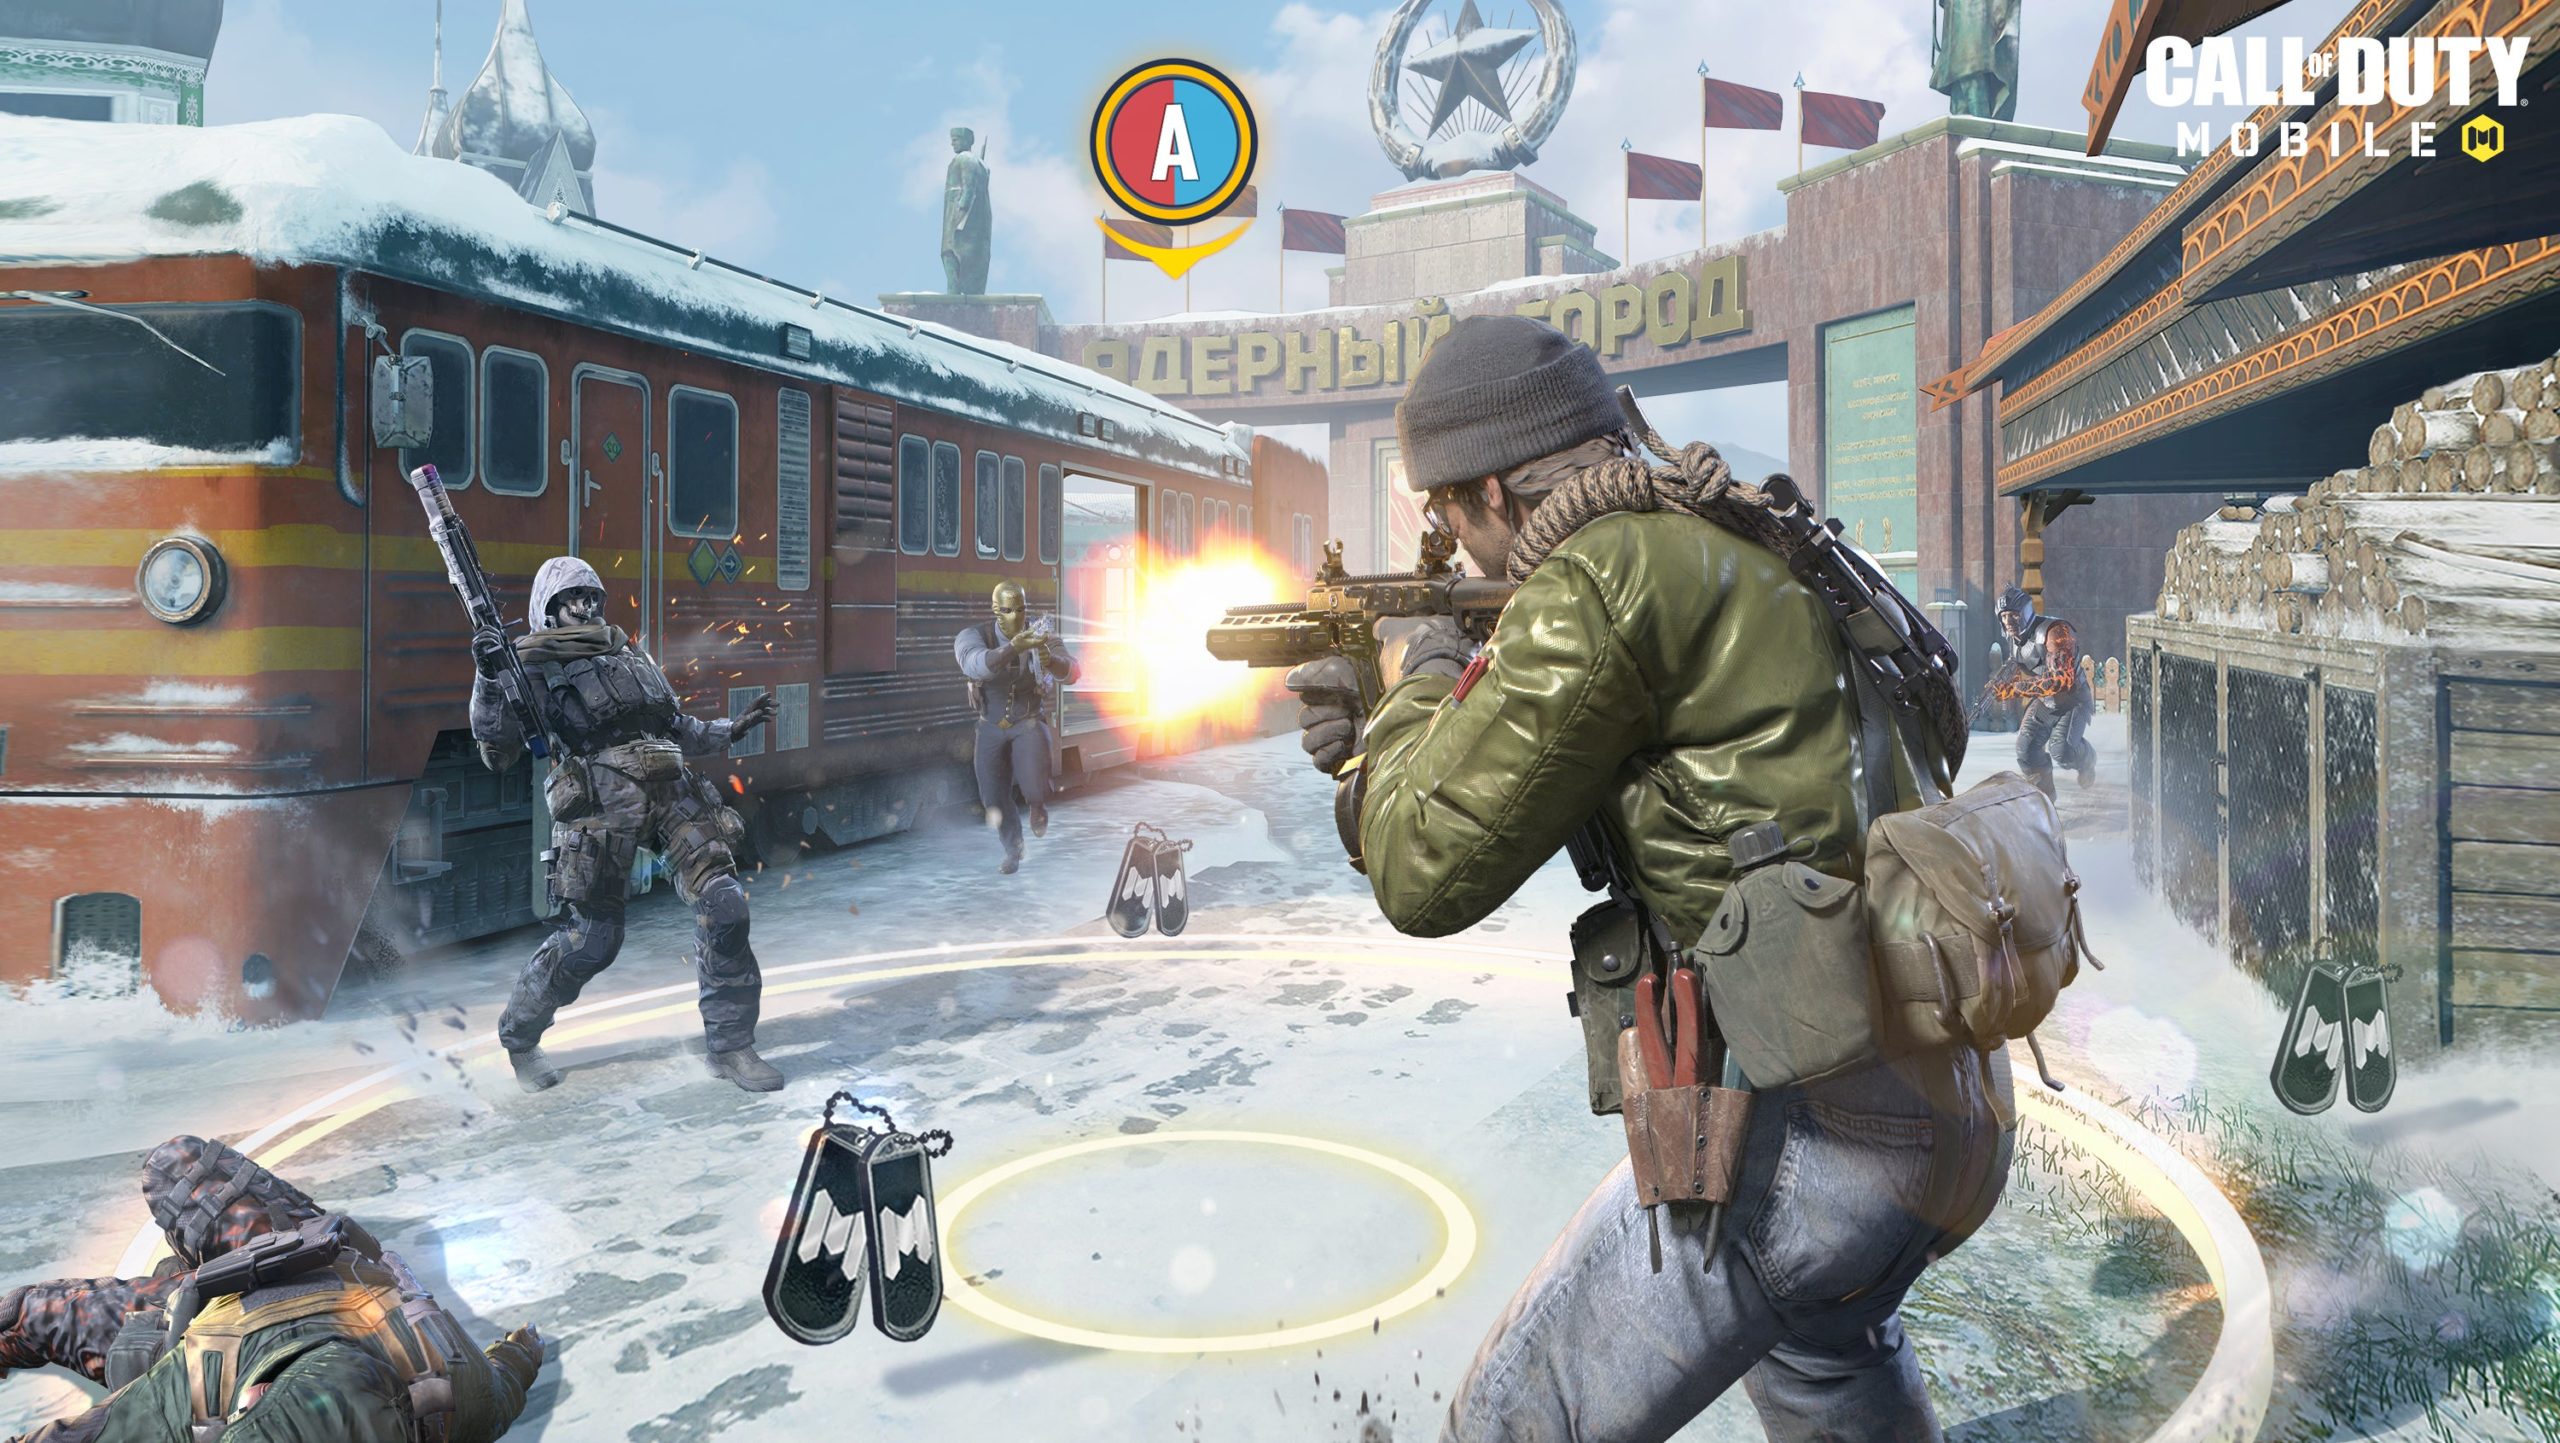 Call of Duty: Warzone Mobile is much better than I expected it to be